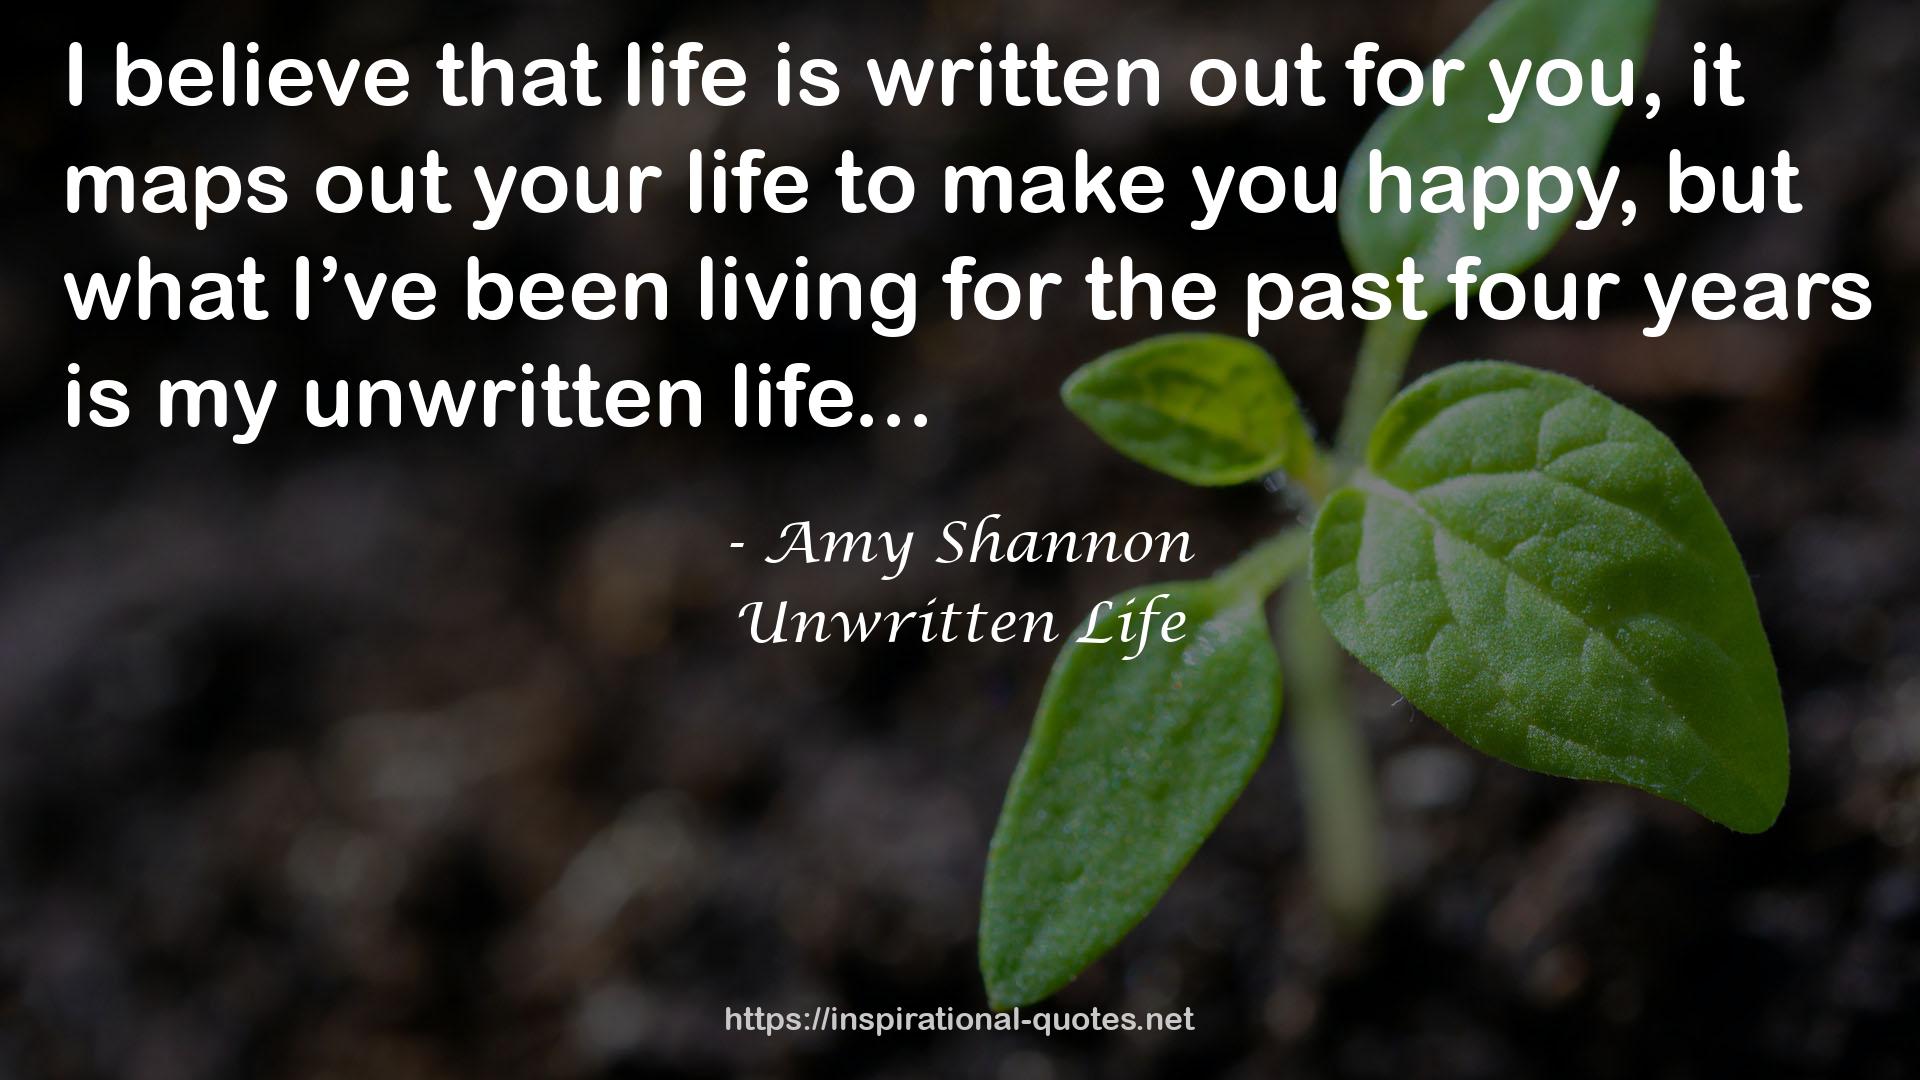 Amy Shannon QUOTES